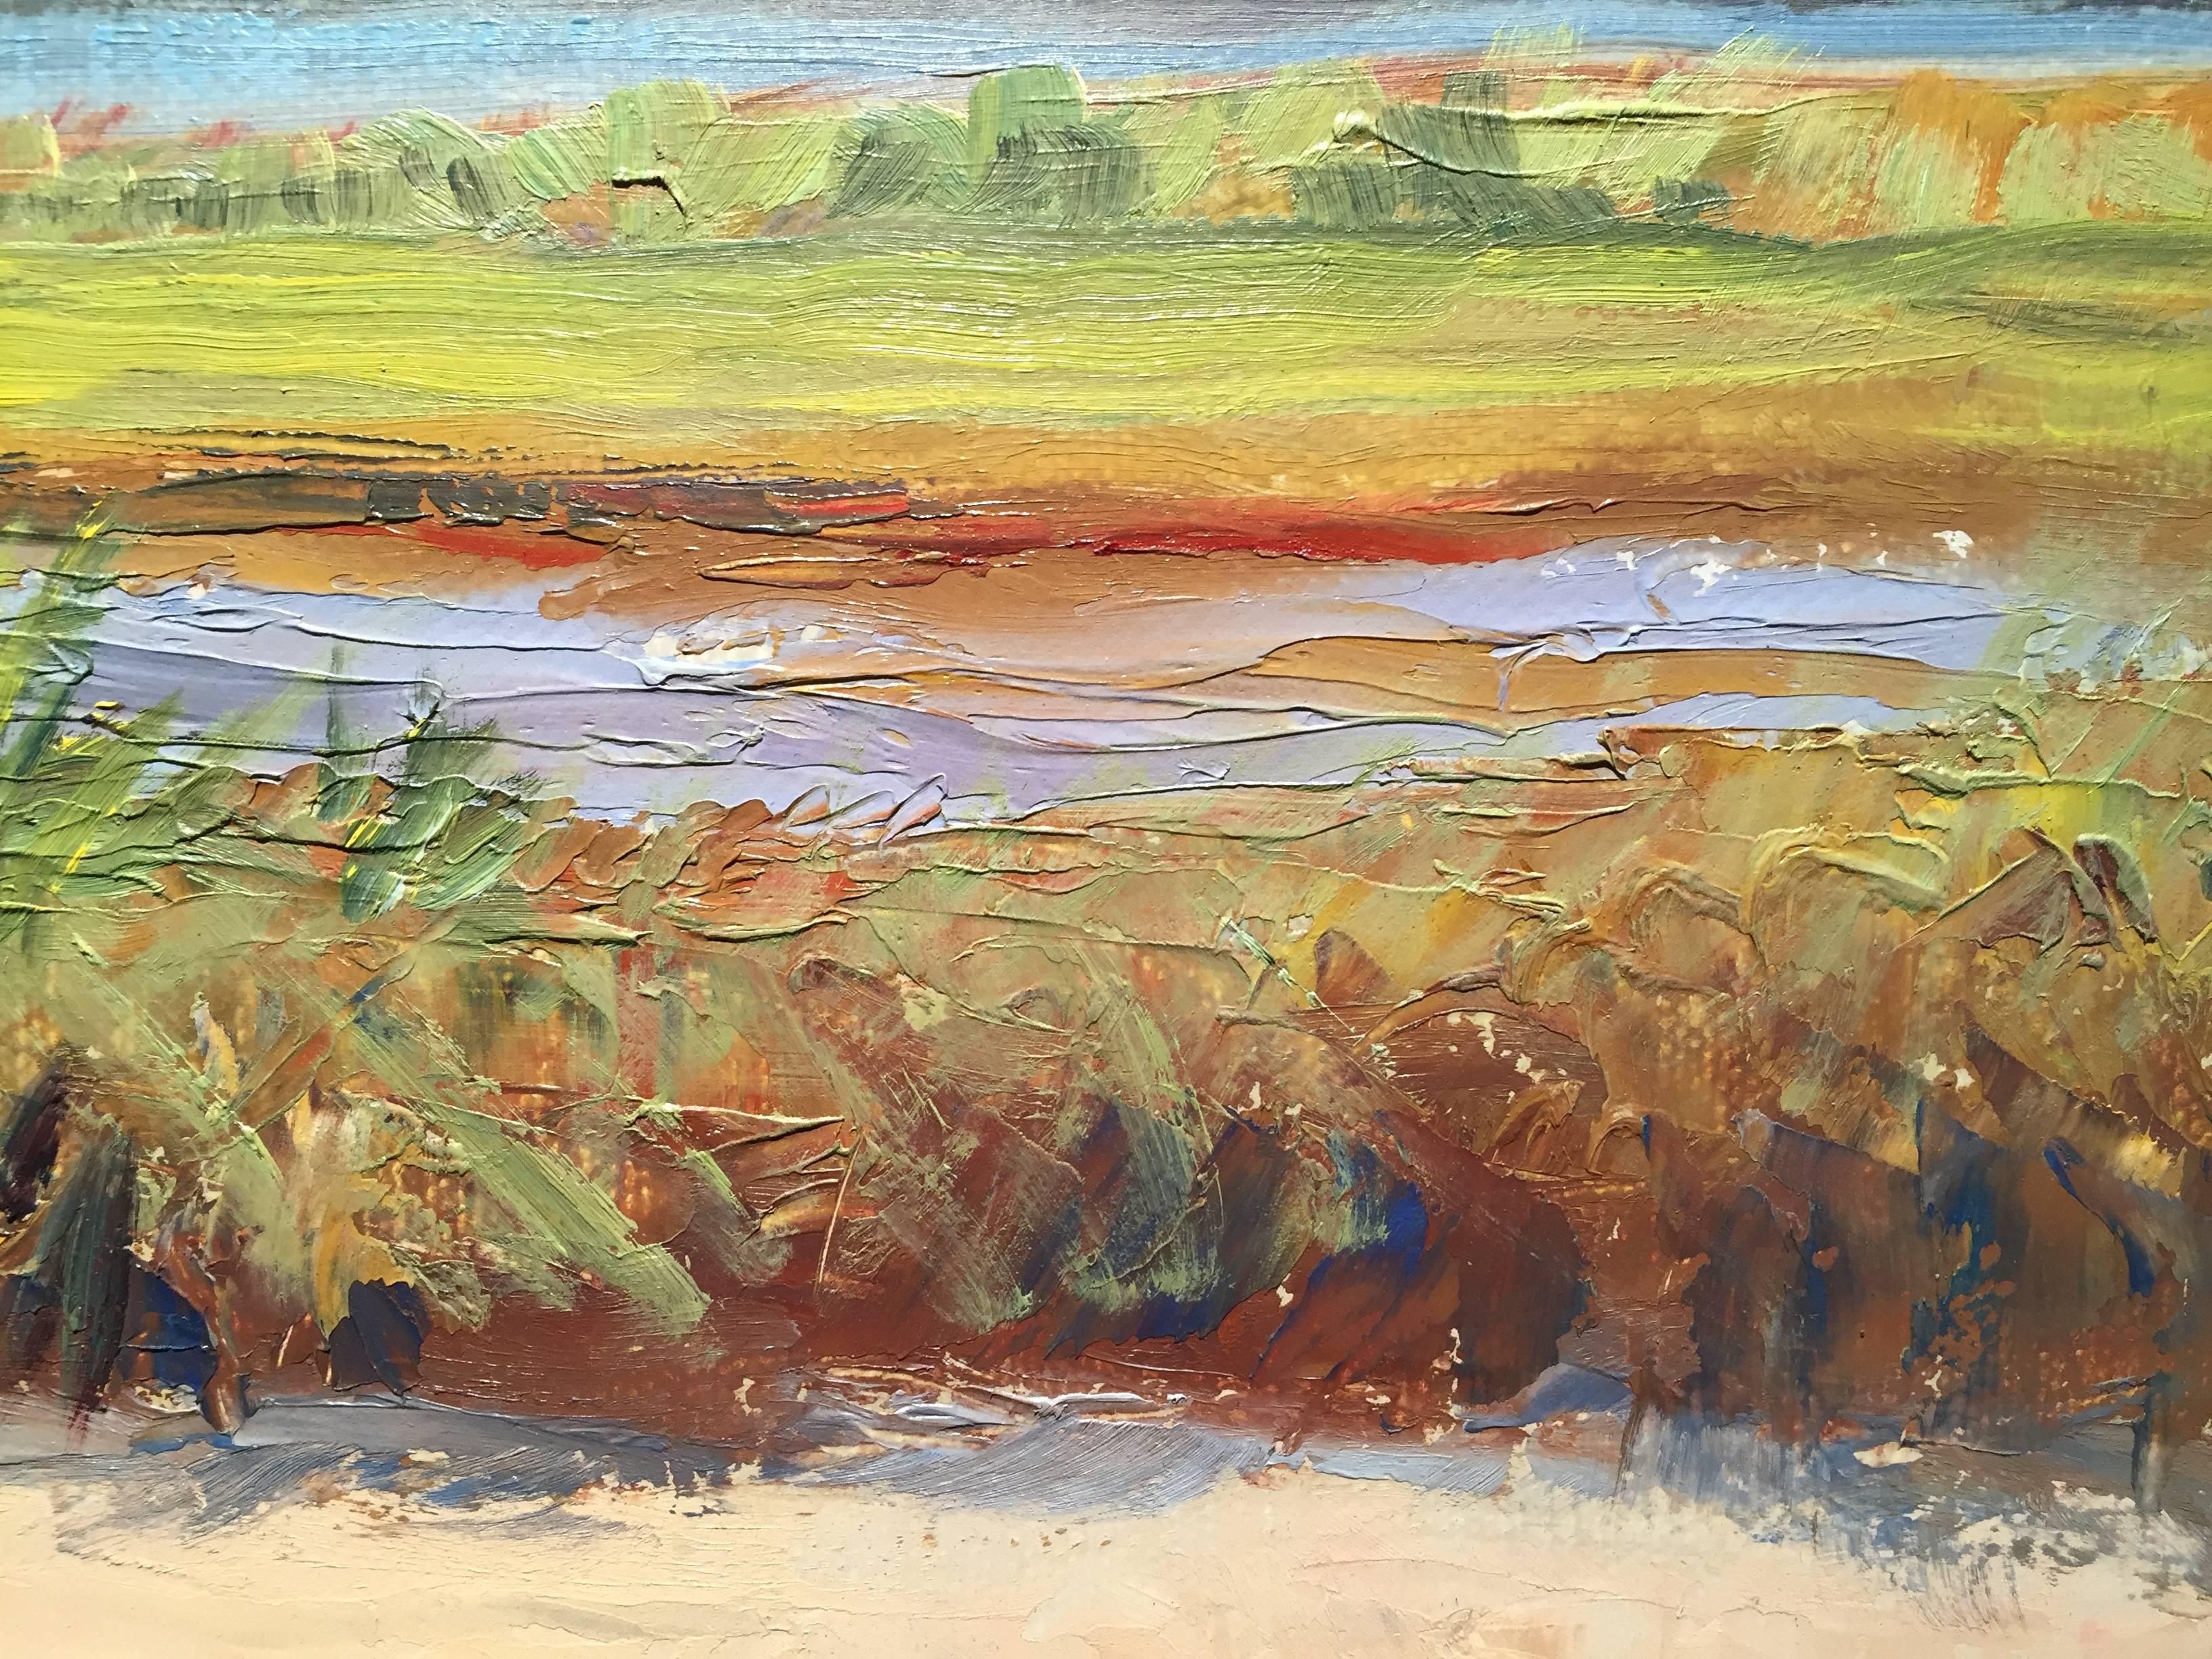 Painted en plein air, at Mashomack Nature Preserve, Shelter Island, New York. Sand meets shrubbery with red shadows in the foreground. Wild green grass stands tall outlining a marsh. Distant hills line the horizon, beneath a colorful pastel